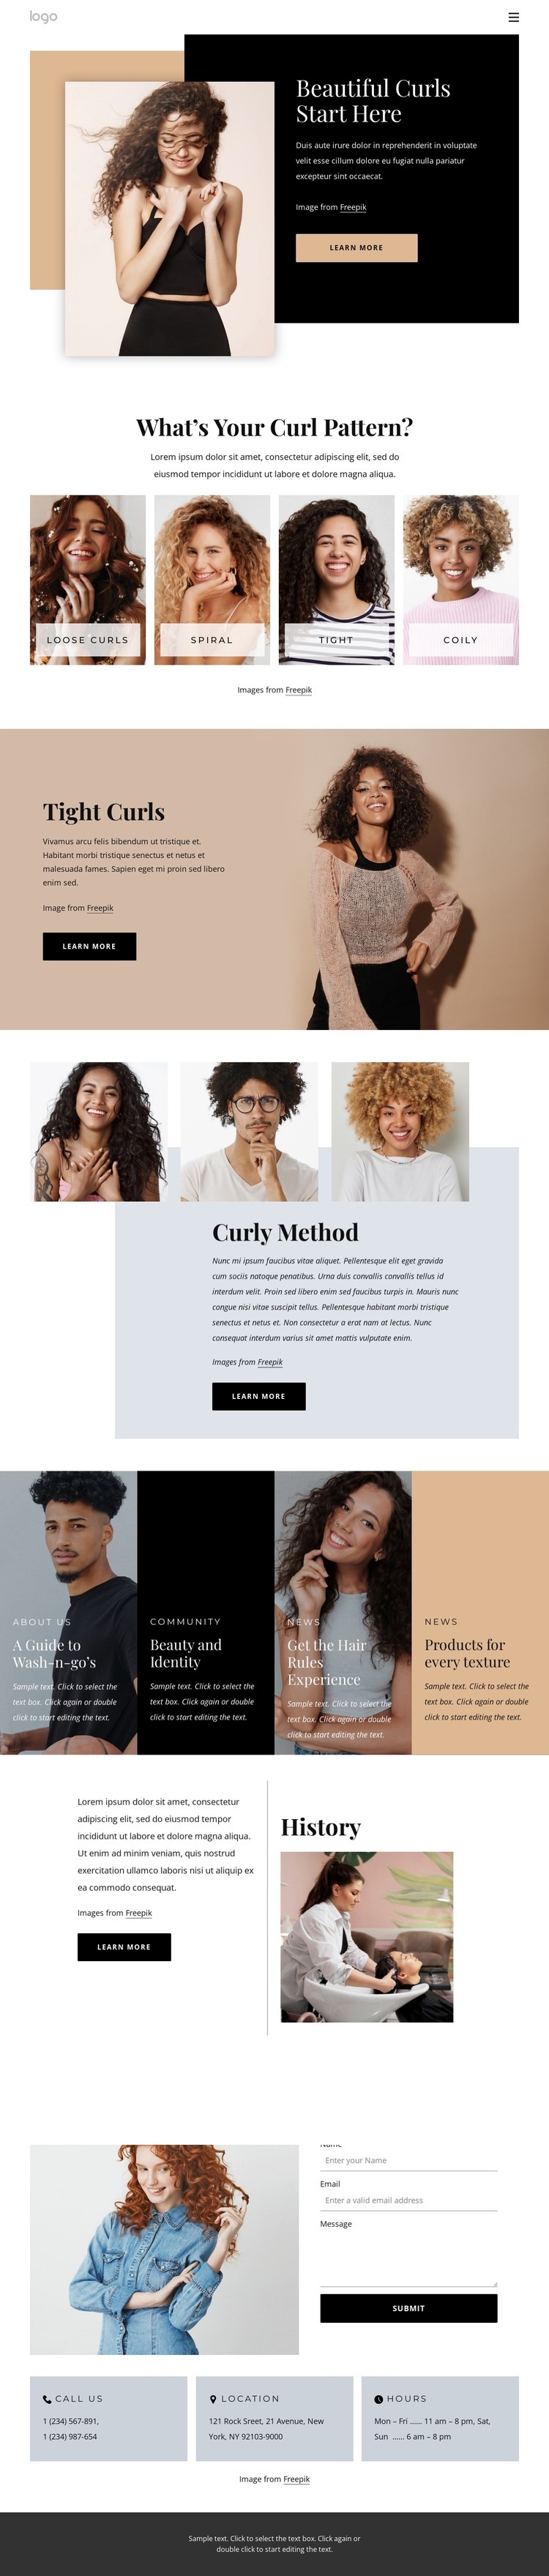 Bring out the best in your curls Squarespace Template Alternative